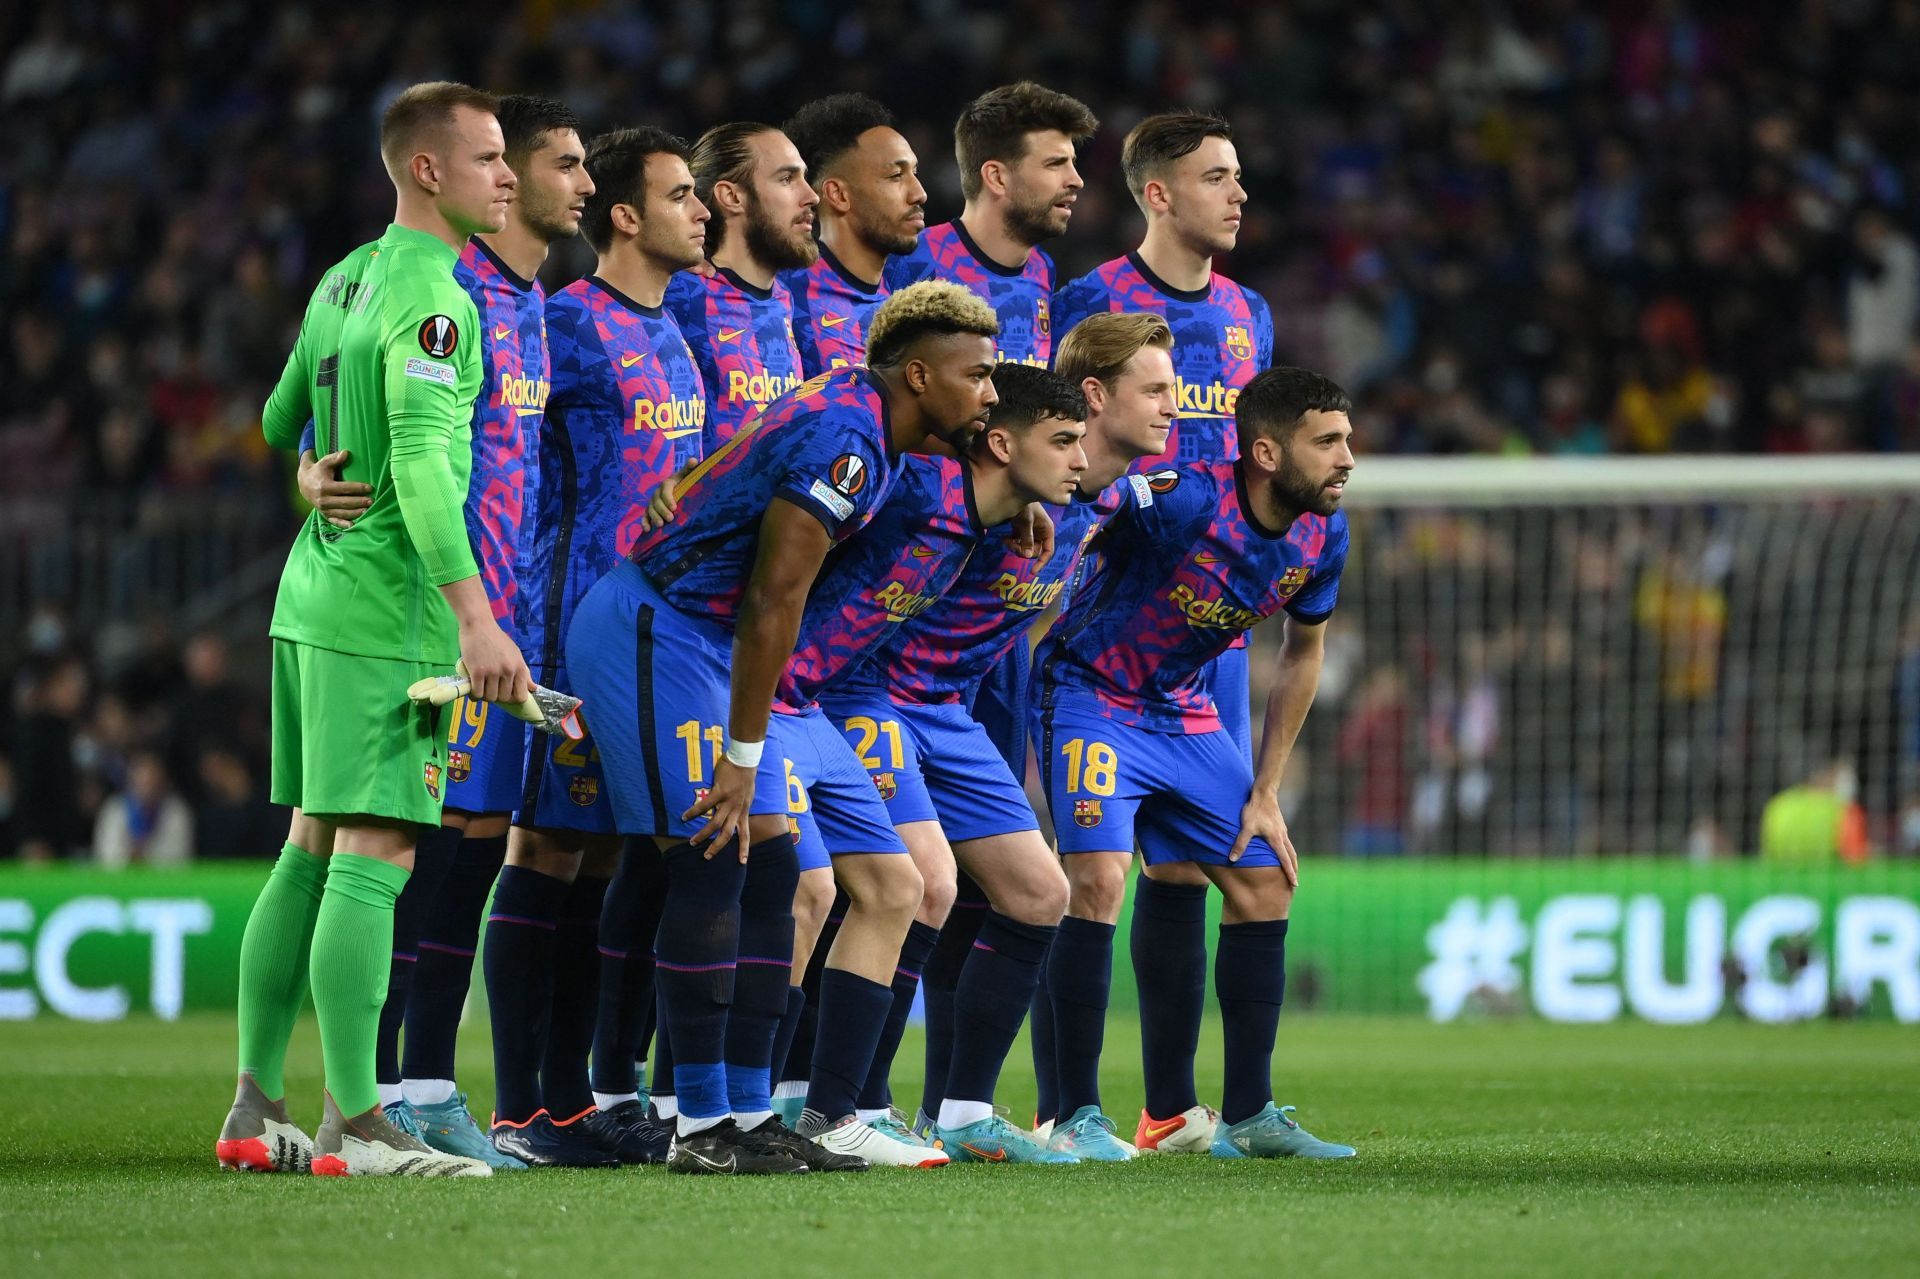 Barcelona were held to a 1-1 draw by Napoli in the Europa League